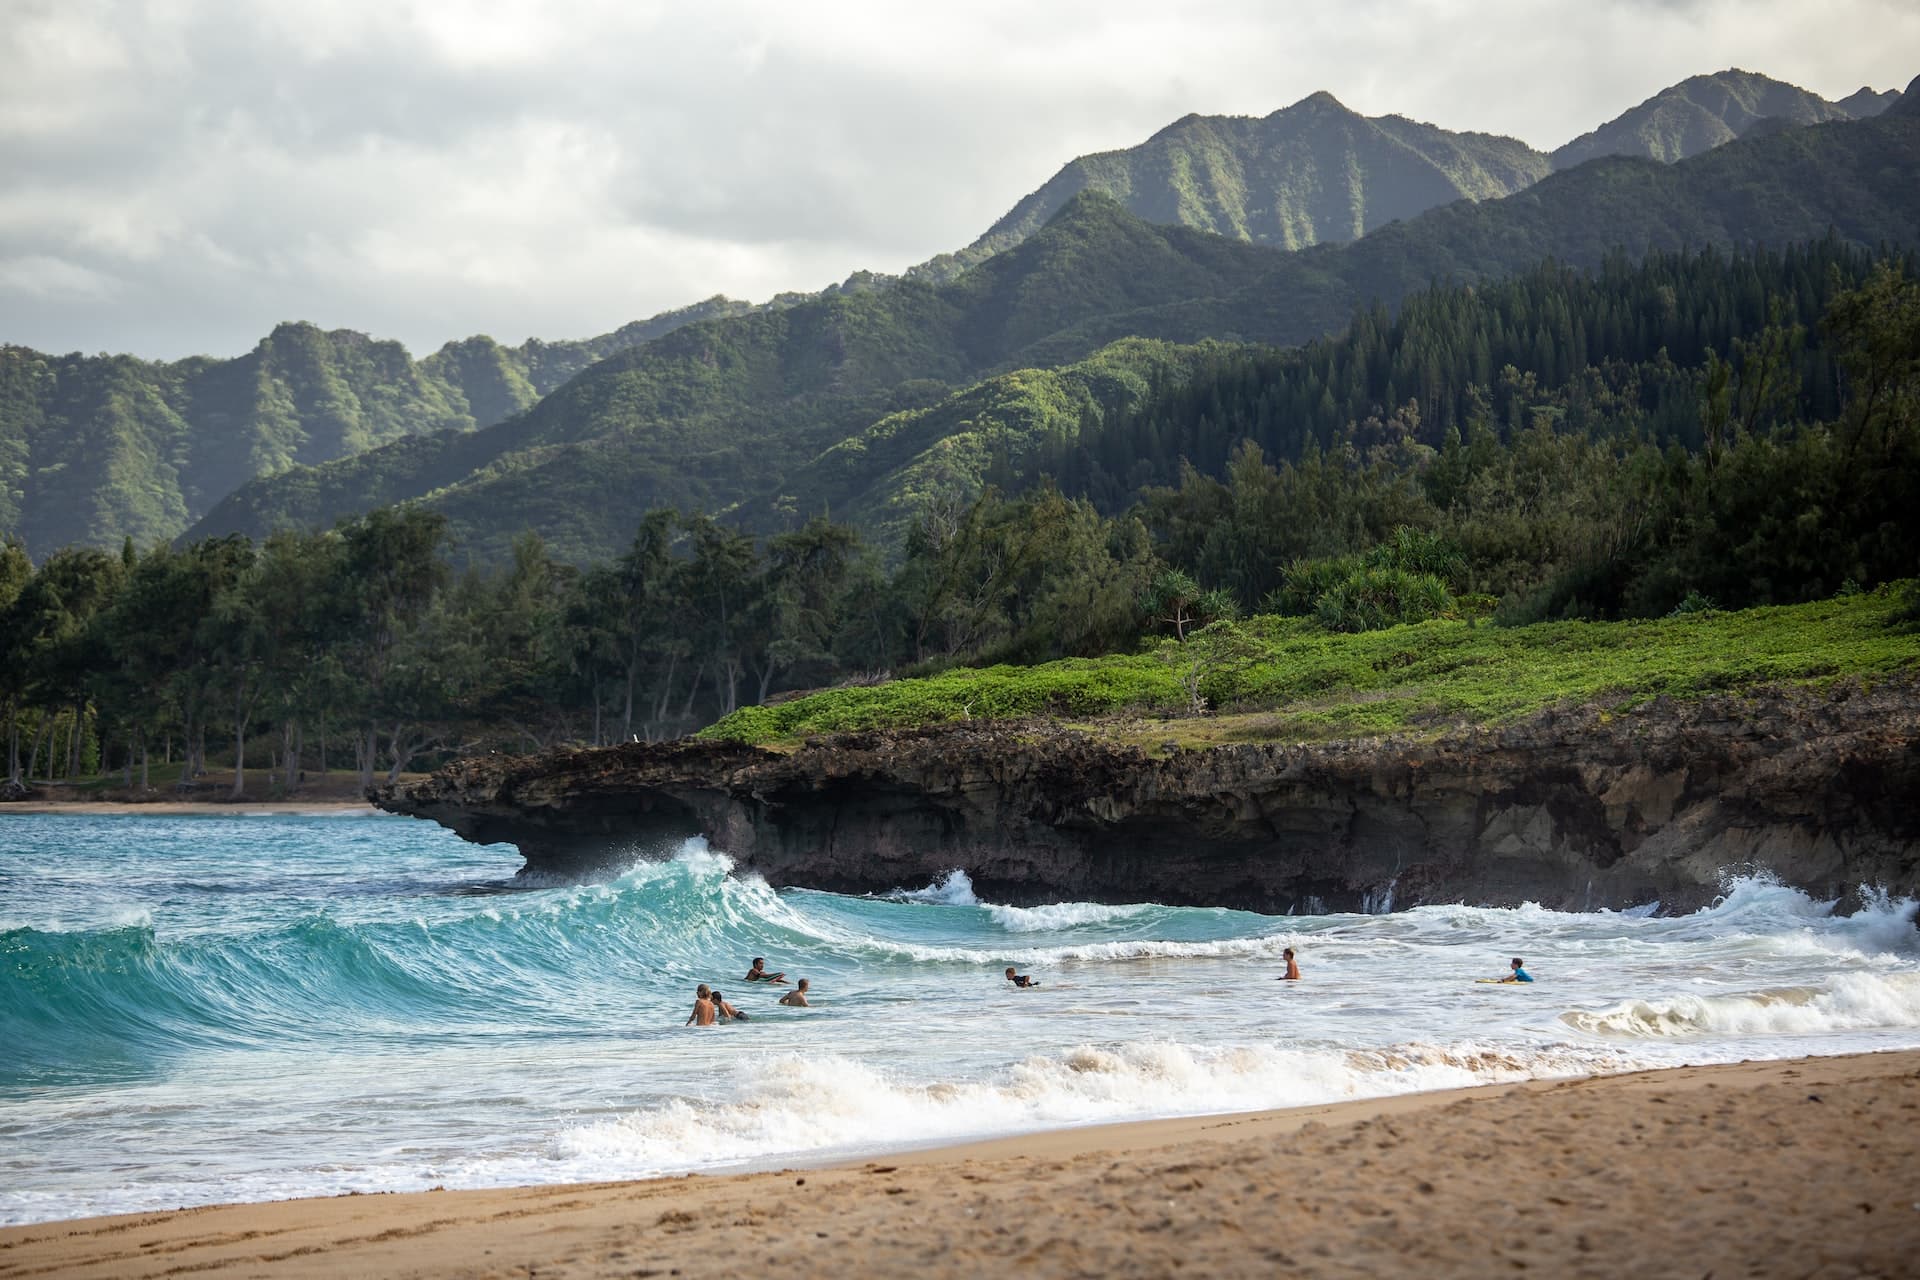 Waves on an Oahu beach with mountains in the distance